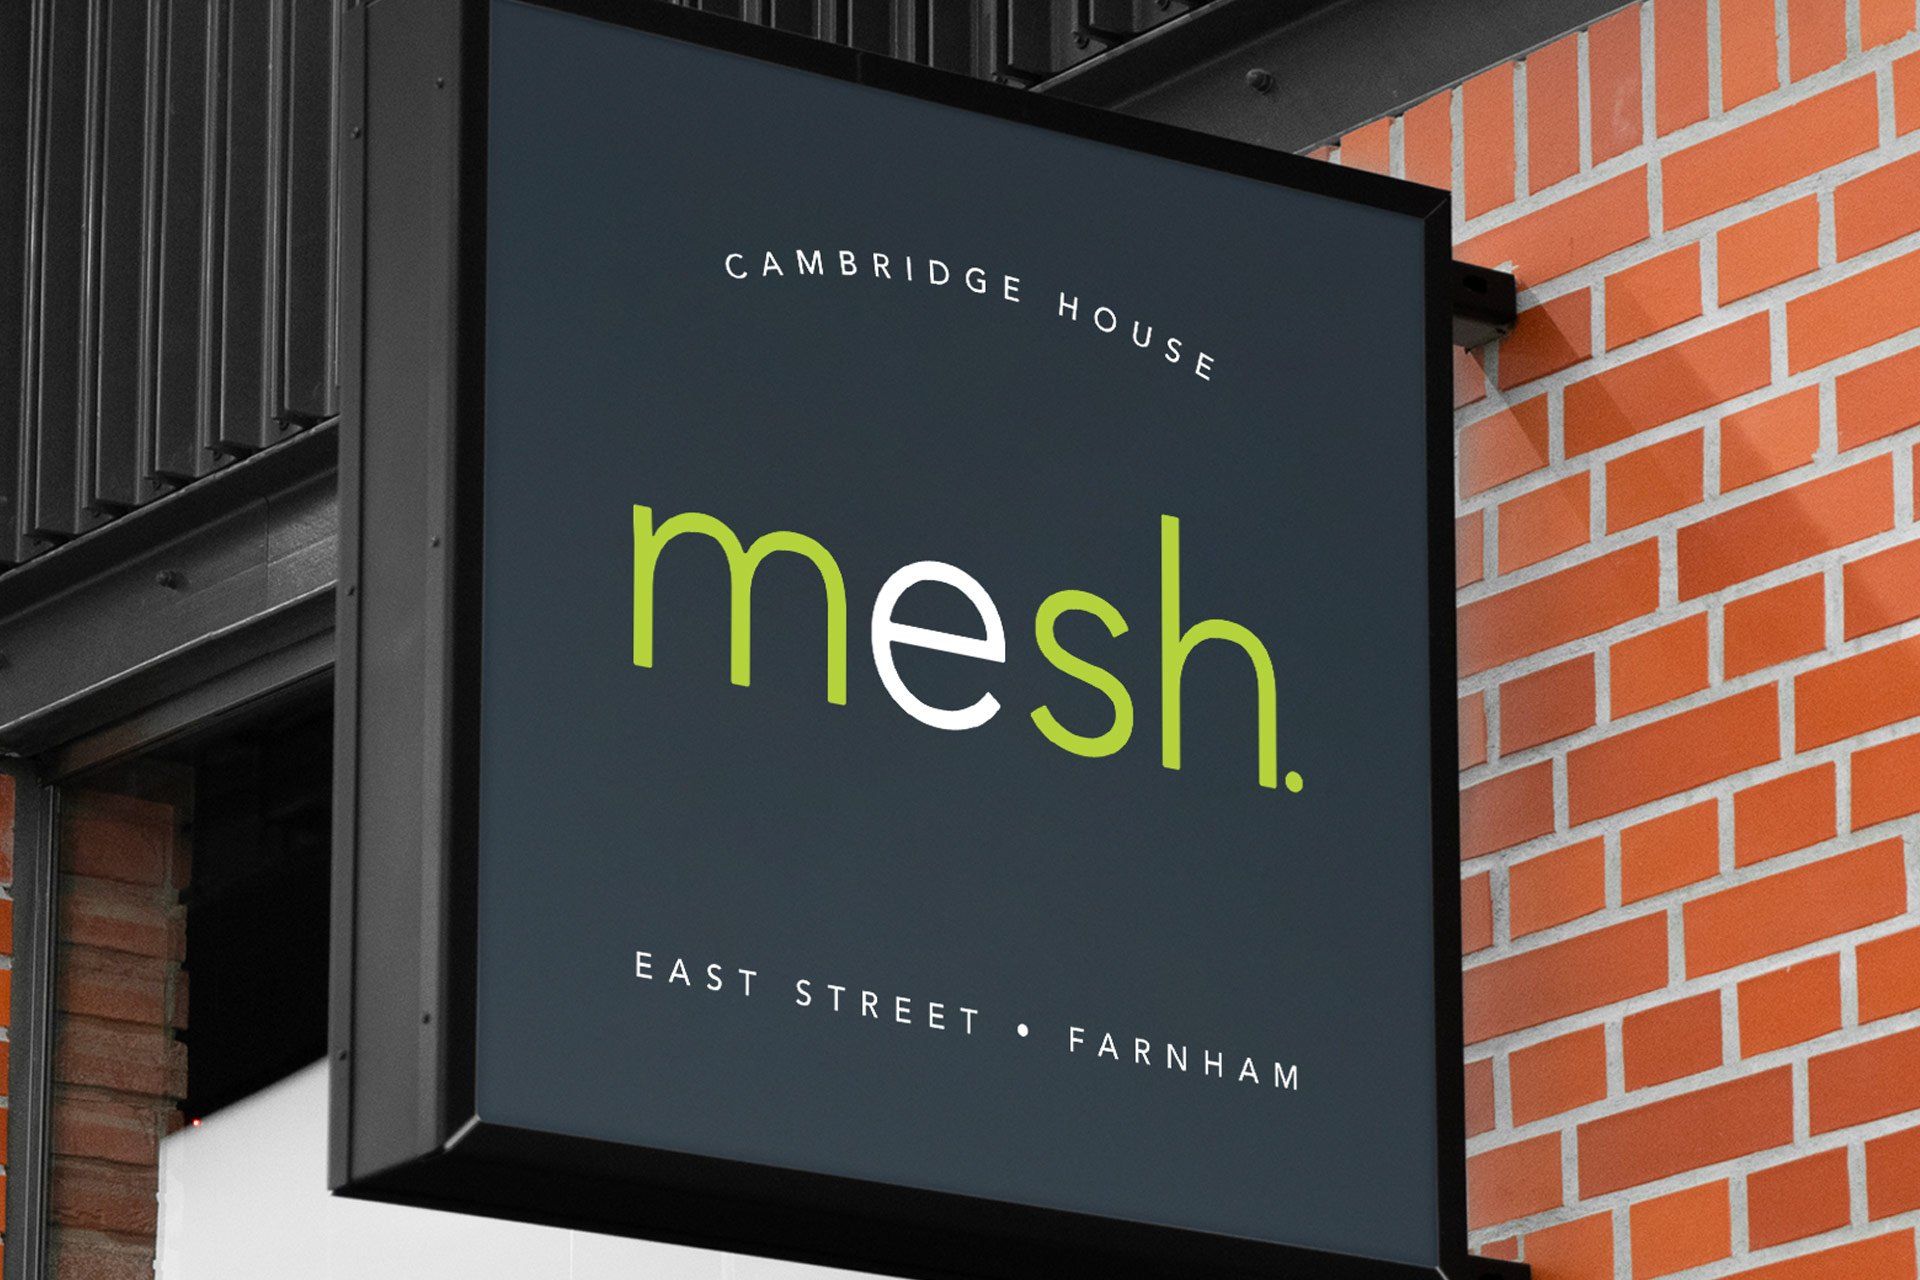 The mesh logo shown on a sign protruding from a red brick wall. The sign also reads 